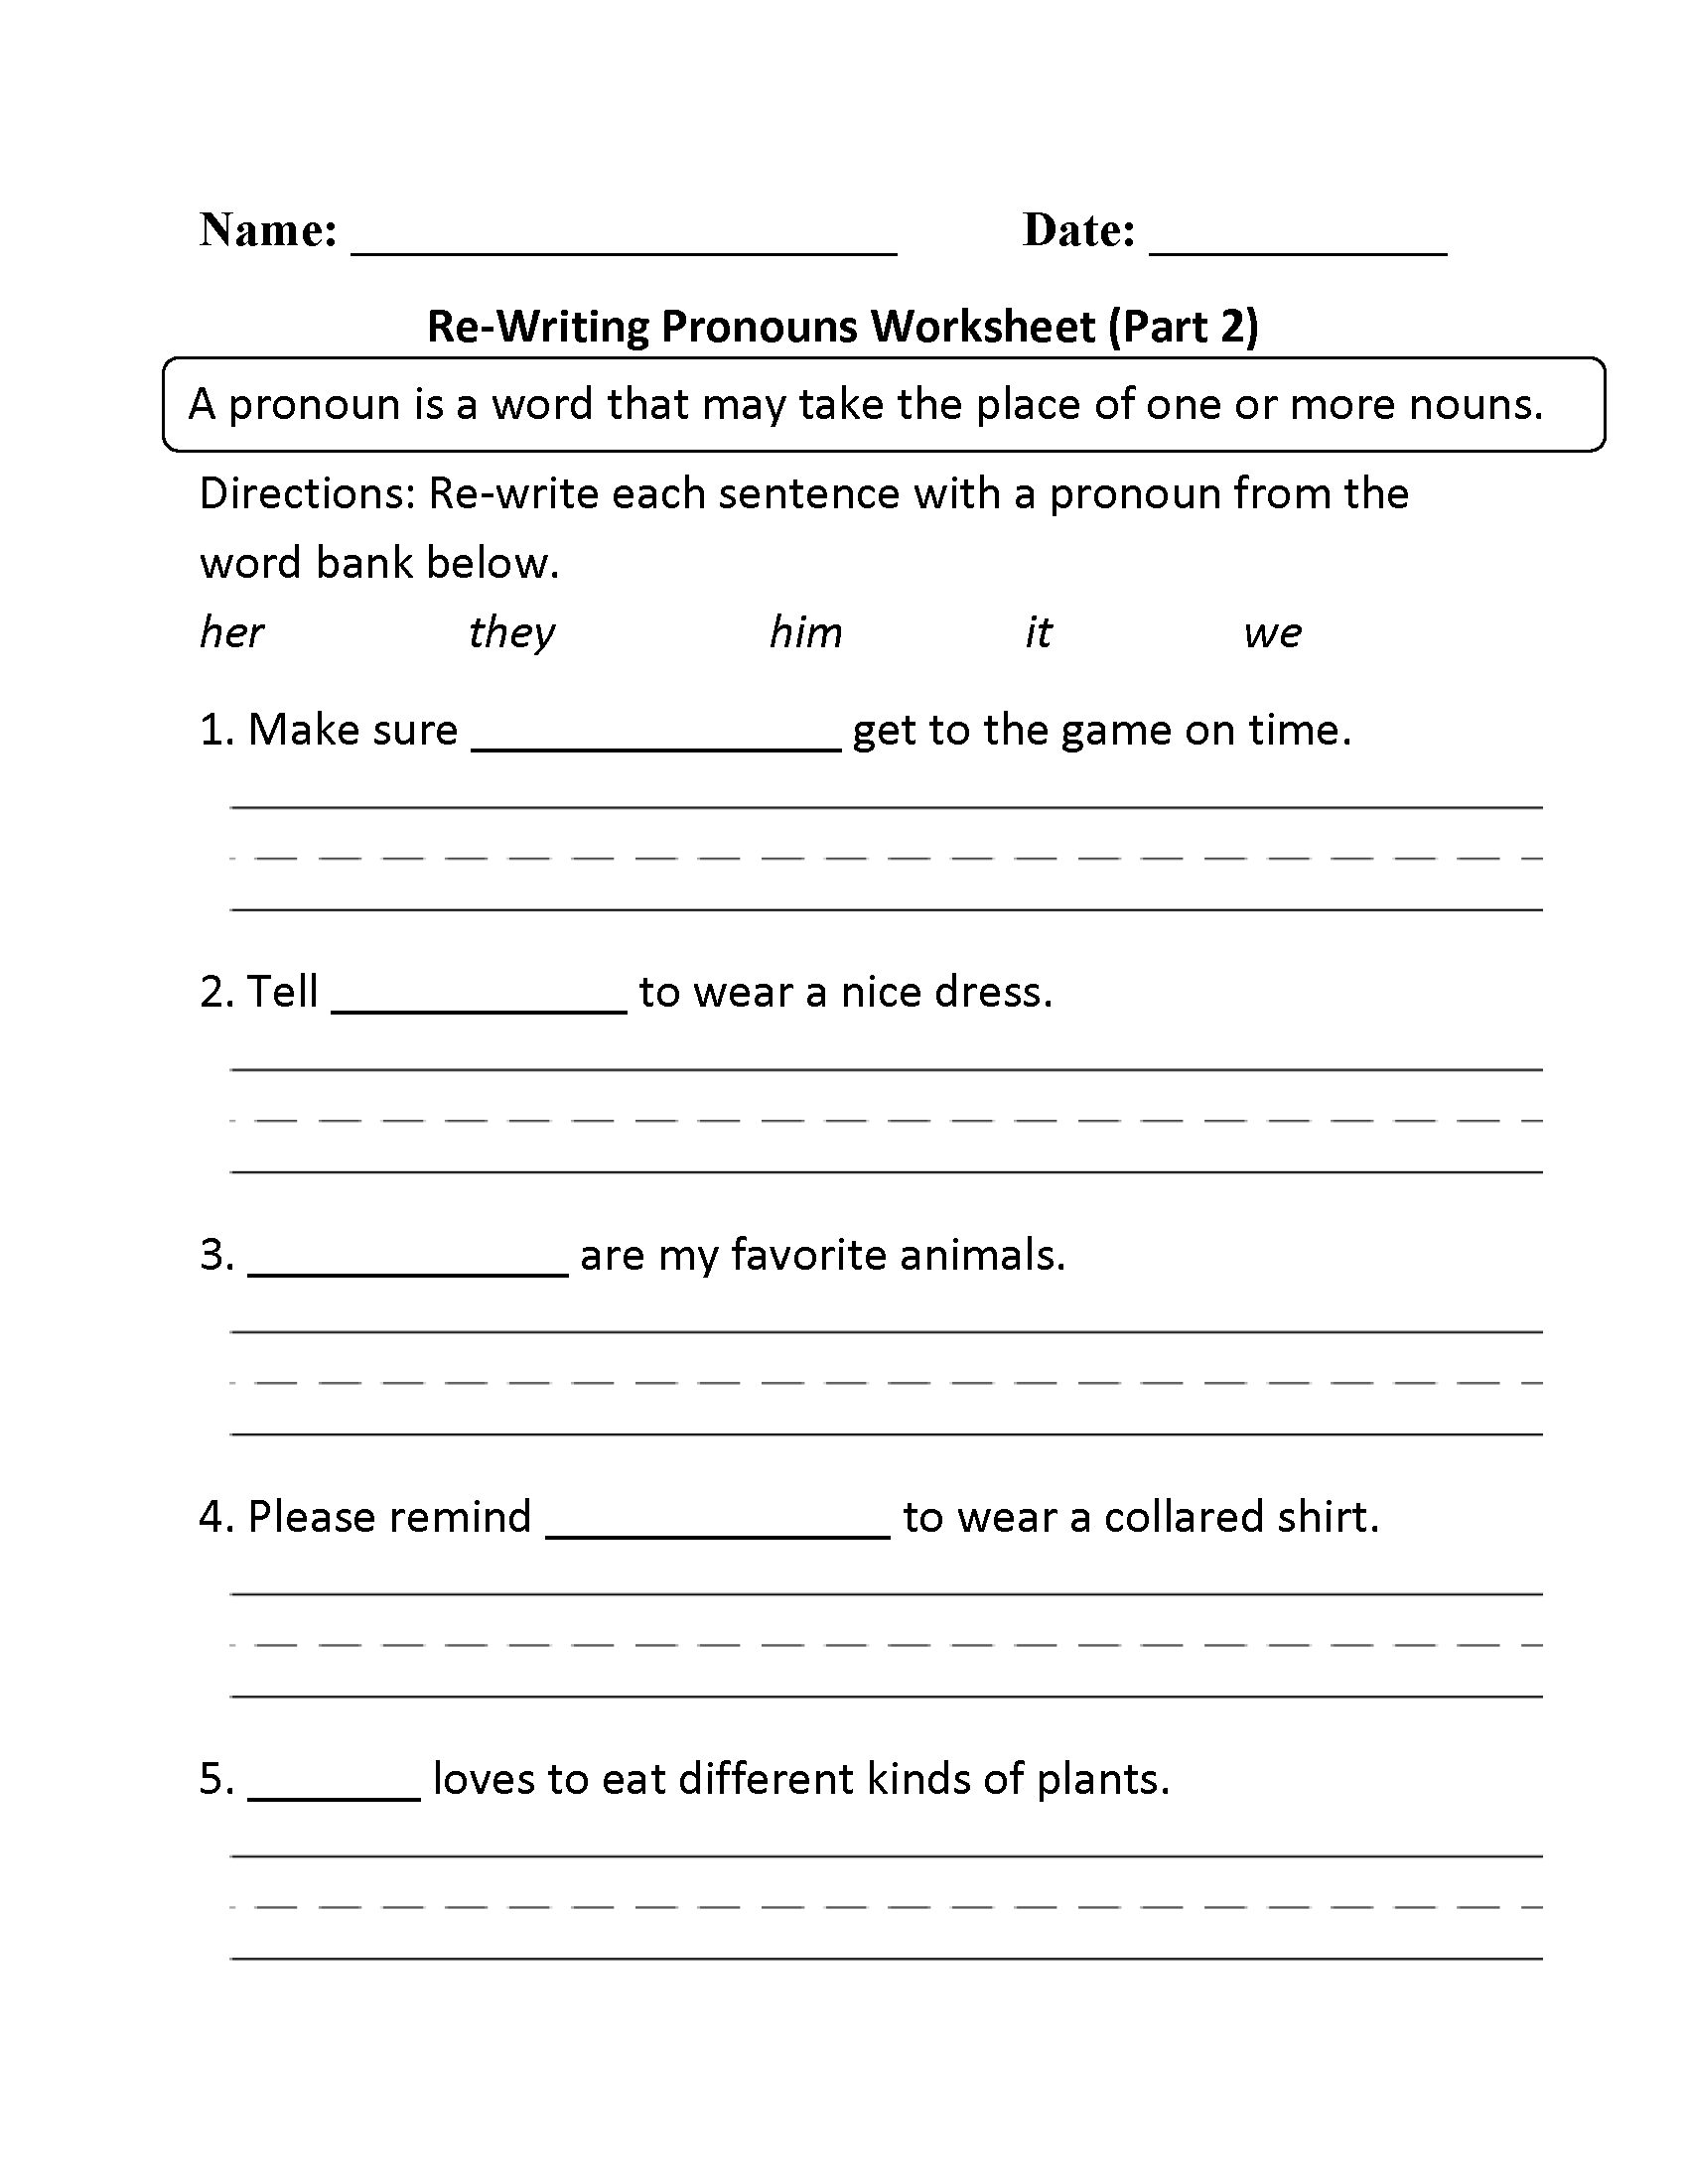 18 Best Images Of Personal Pronoun Worksheet 5th Grade Pronouns Worksheets 5th Grade